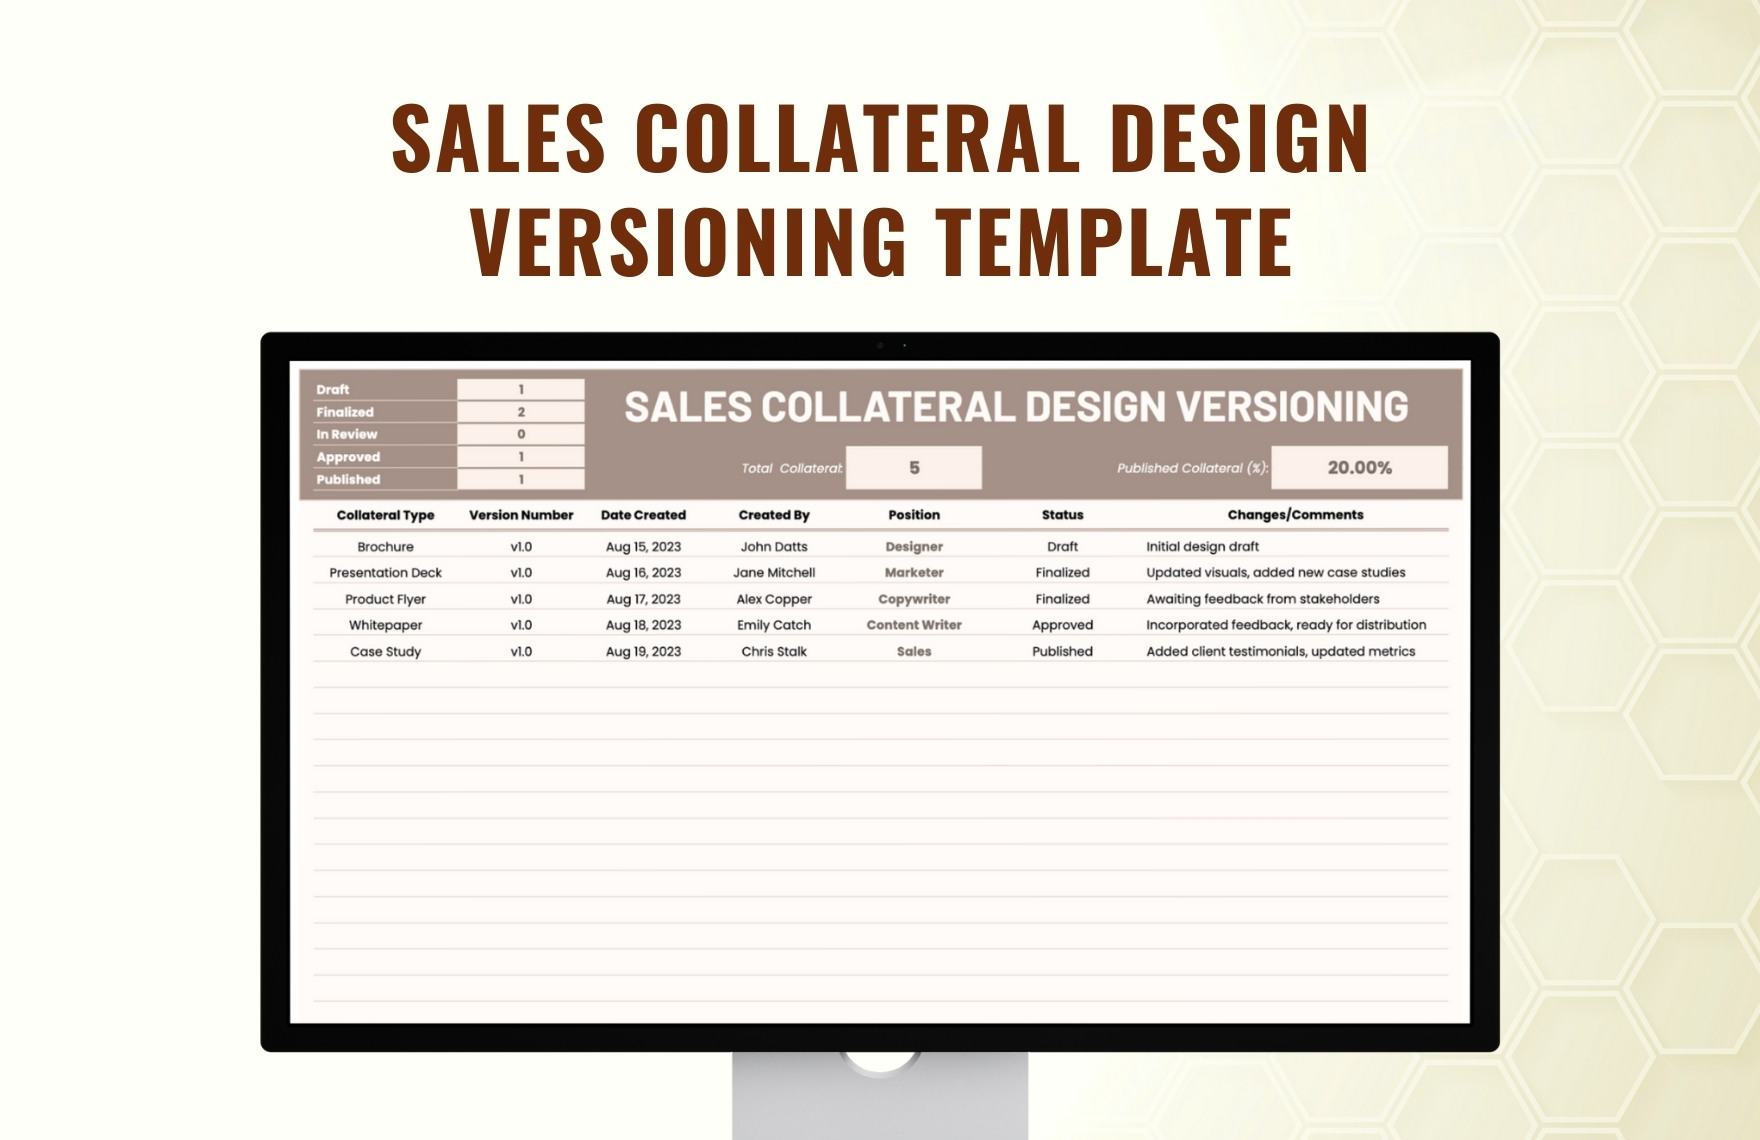 Sales Collateral Design Versioning Template